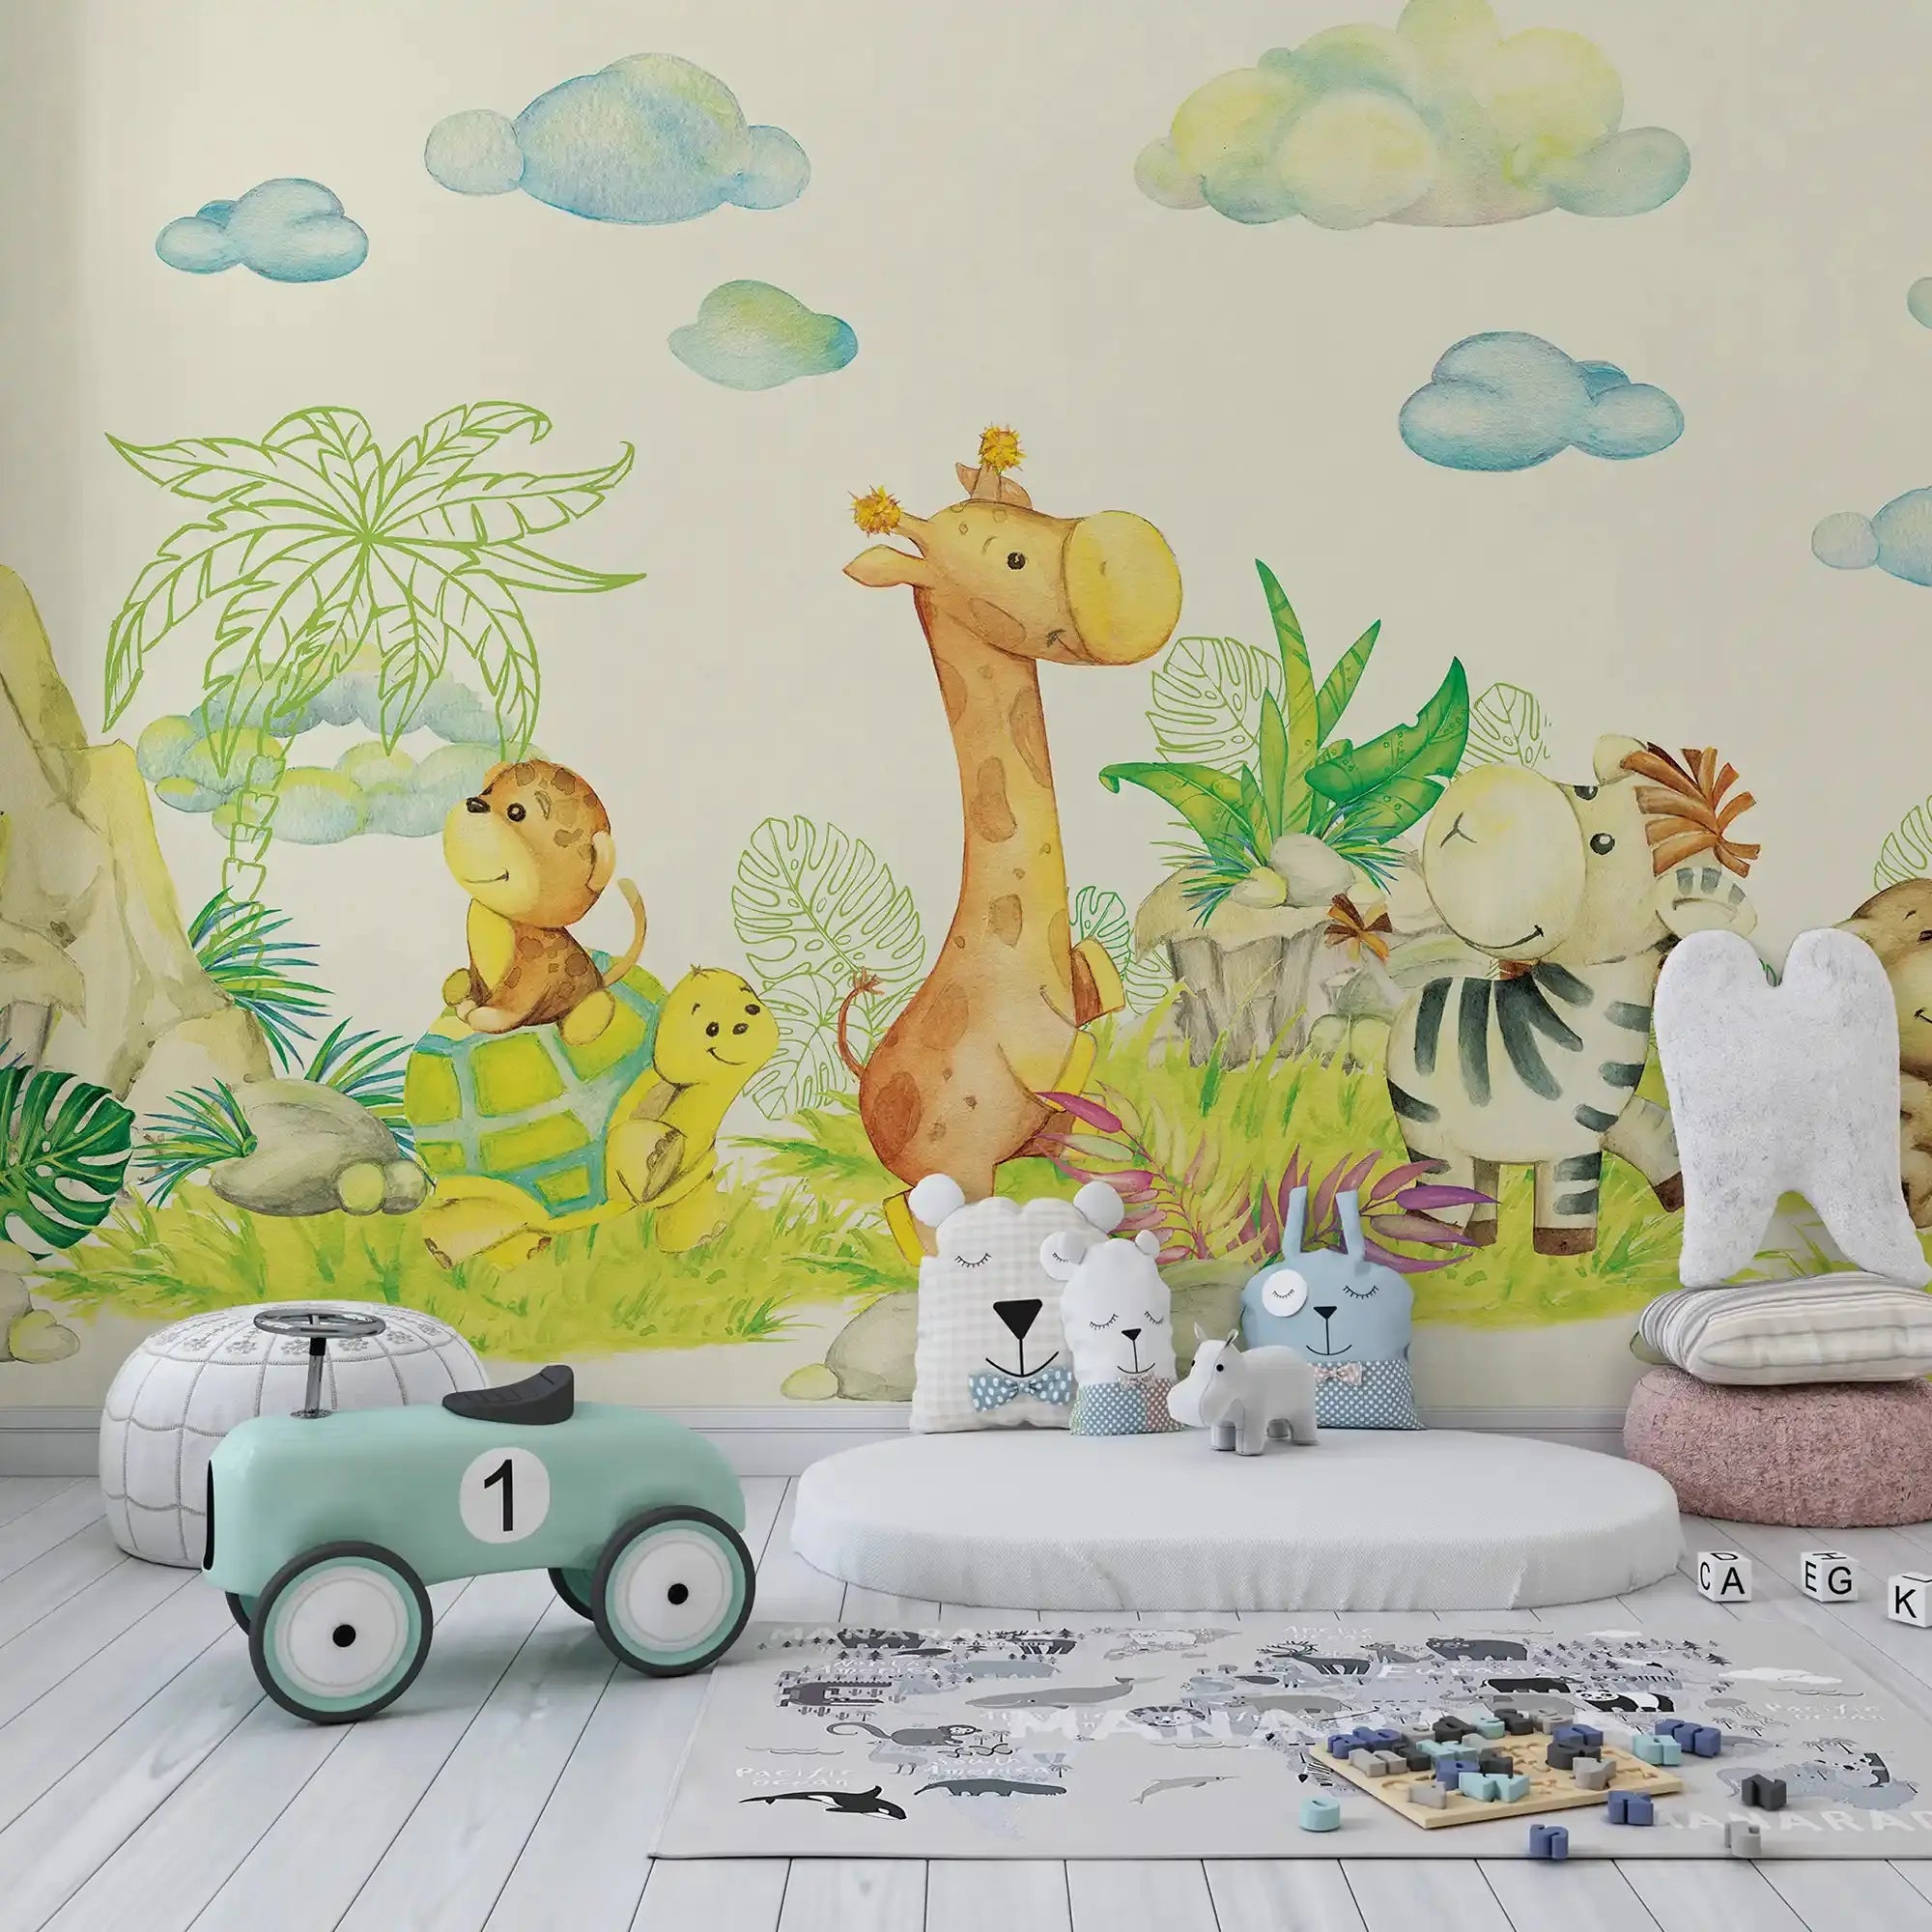 6001 / Cute Zoo Animal Peel and Stick Wallpaper - Removable Nursery Wall Decals for Kids Room - Artevella